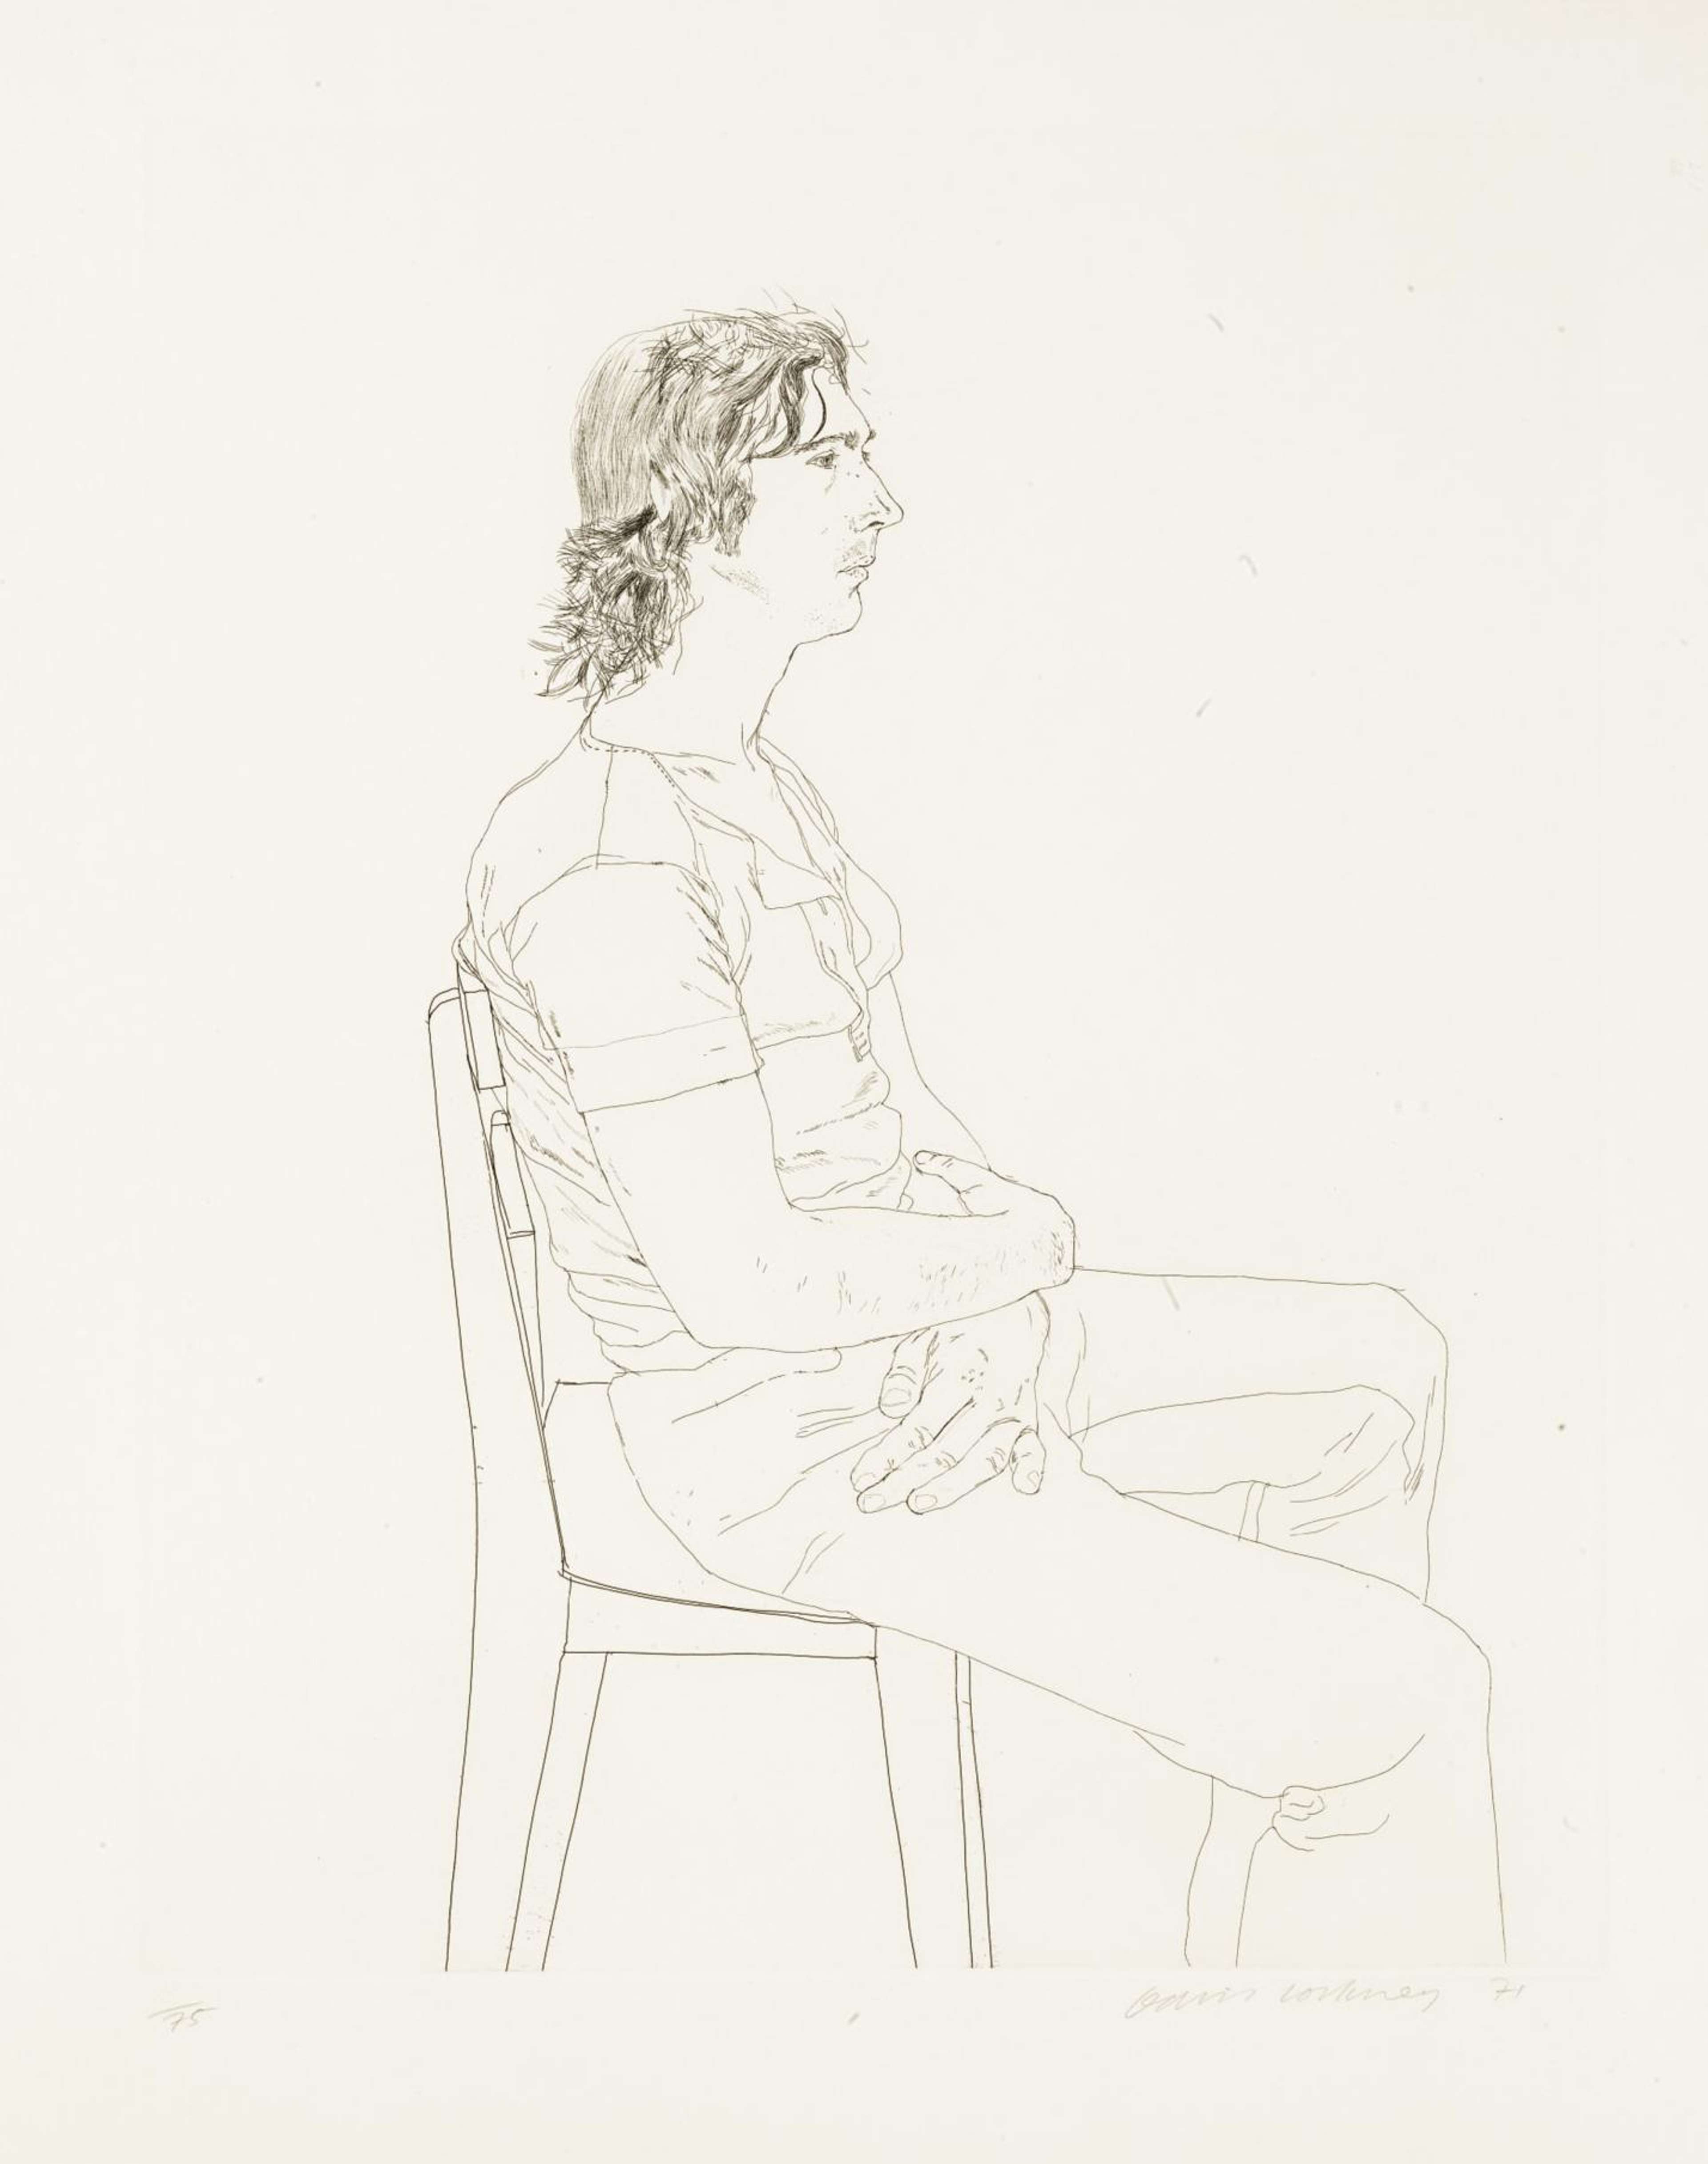 With unparalleled precision, Hockney offers up a side profile of Payne, who is sat in a simple chair – a subject the artist would go on to depict time and time again. With his arms crossed across his stomach, Payne emits a sense of stillness, his dark hair brought out in a series of rough and jagged lines which contrast with his figure.